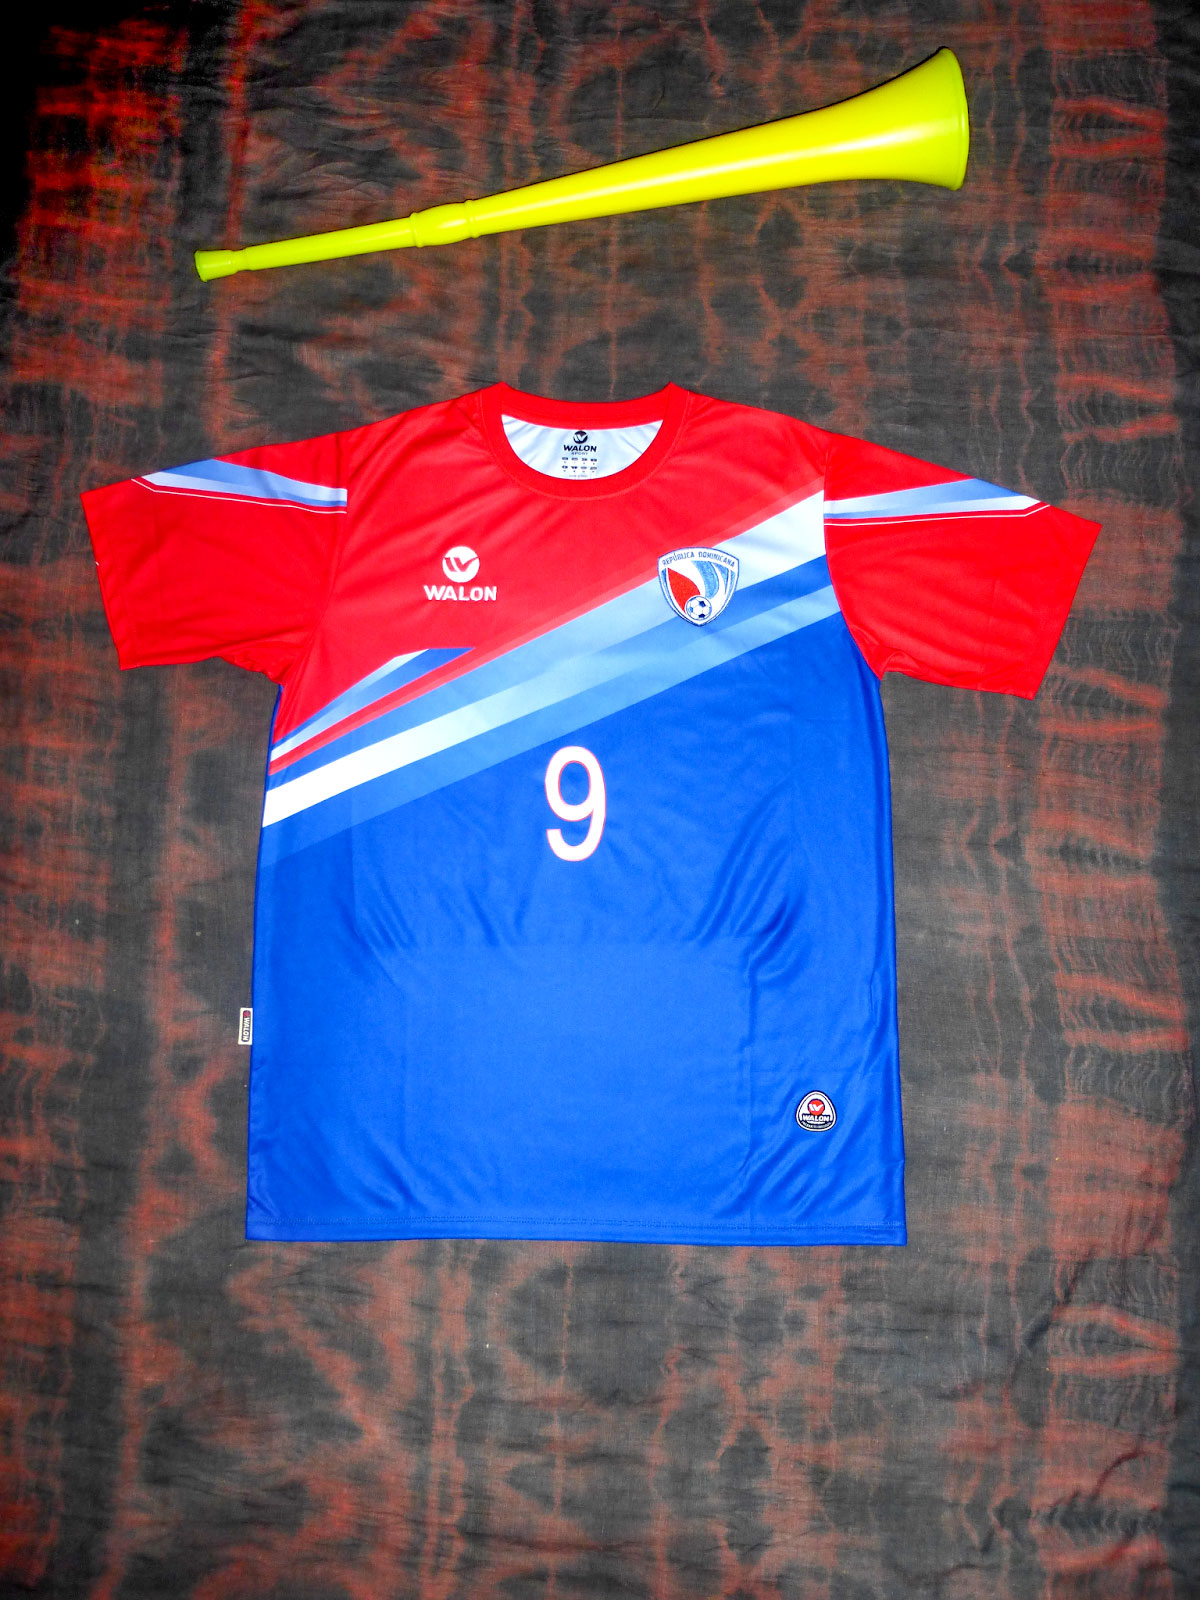 dominican soccer jersey